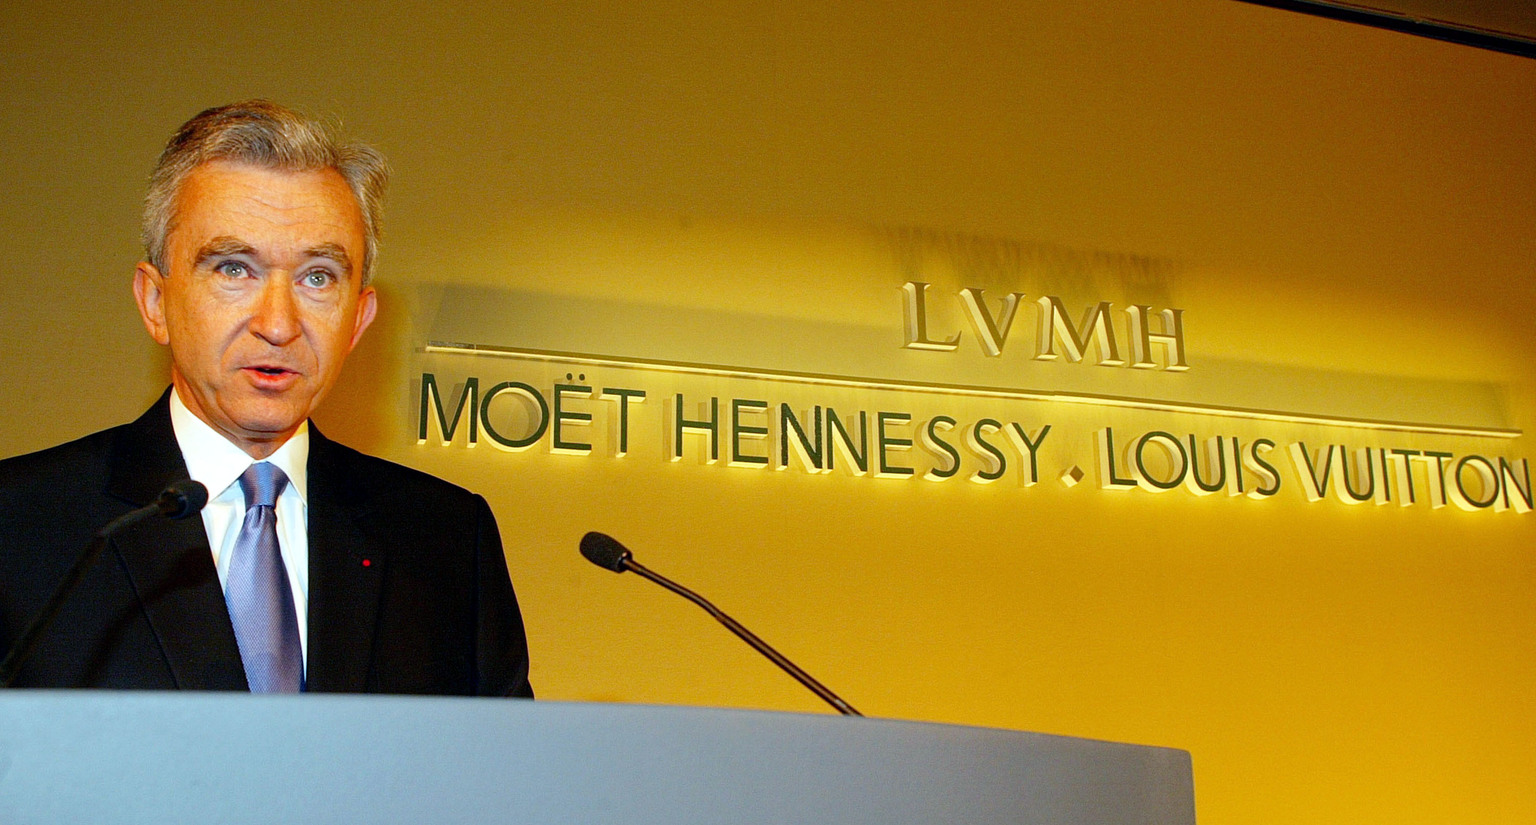 Louis Vuitton Moet Hennessy (LVMH) Stock Analysis - 1413 Words